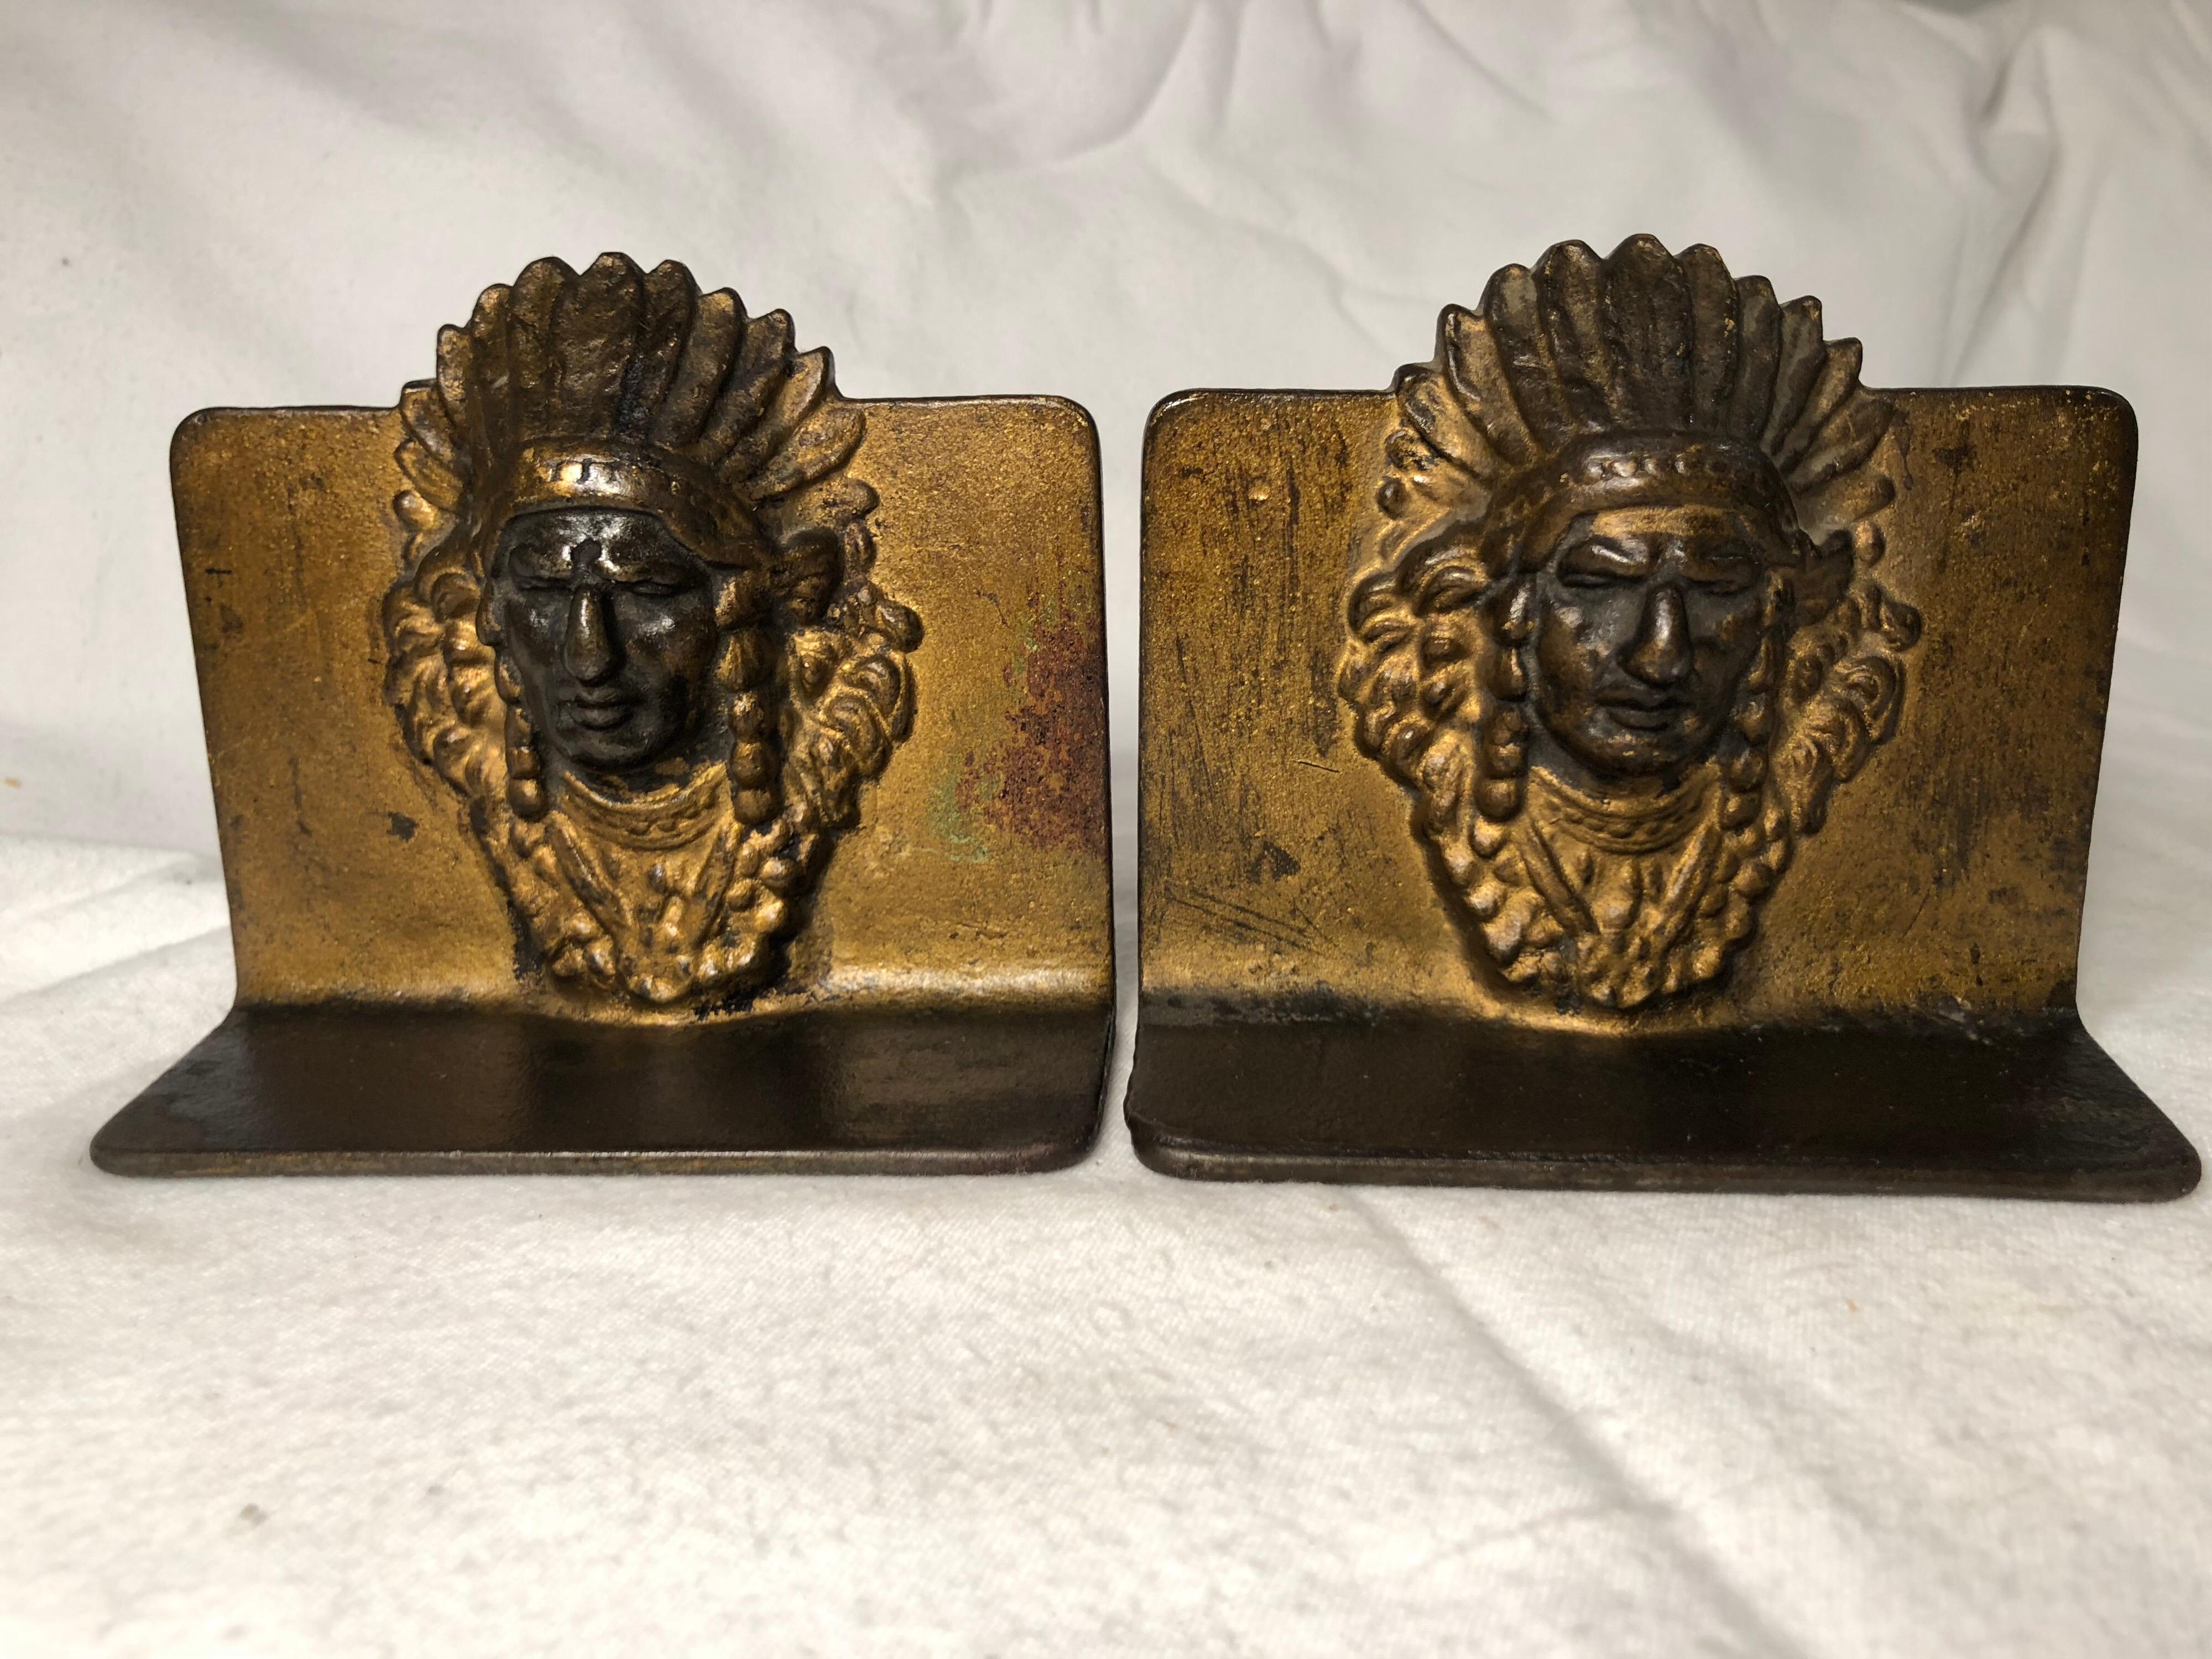 Pair Vintage Set of Indian Chief Metal Bookends Gold These Regal Vintage Native American Style Matched Set of (2) Bookends depict a wonderful rendition of an Indian Chief with a full ceremonial feather & beaded headdress. The Chief is wearing a